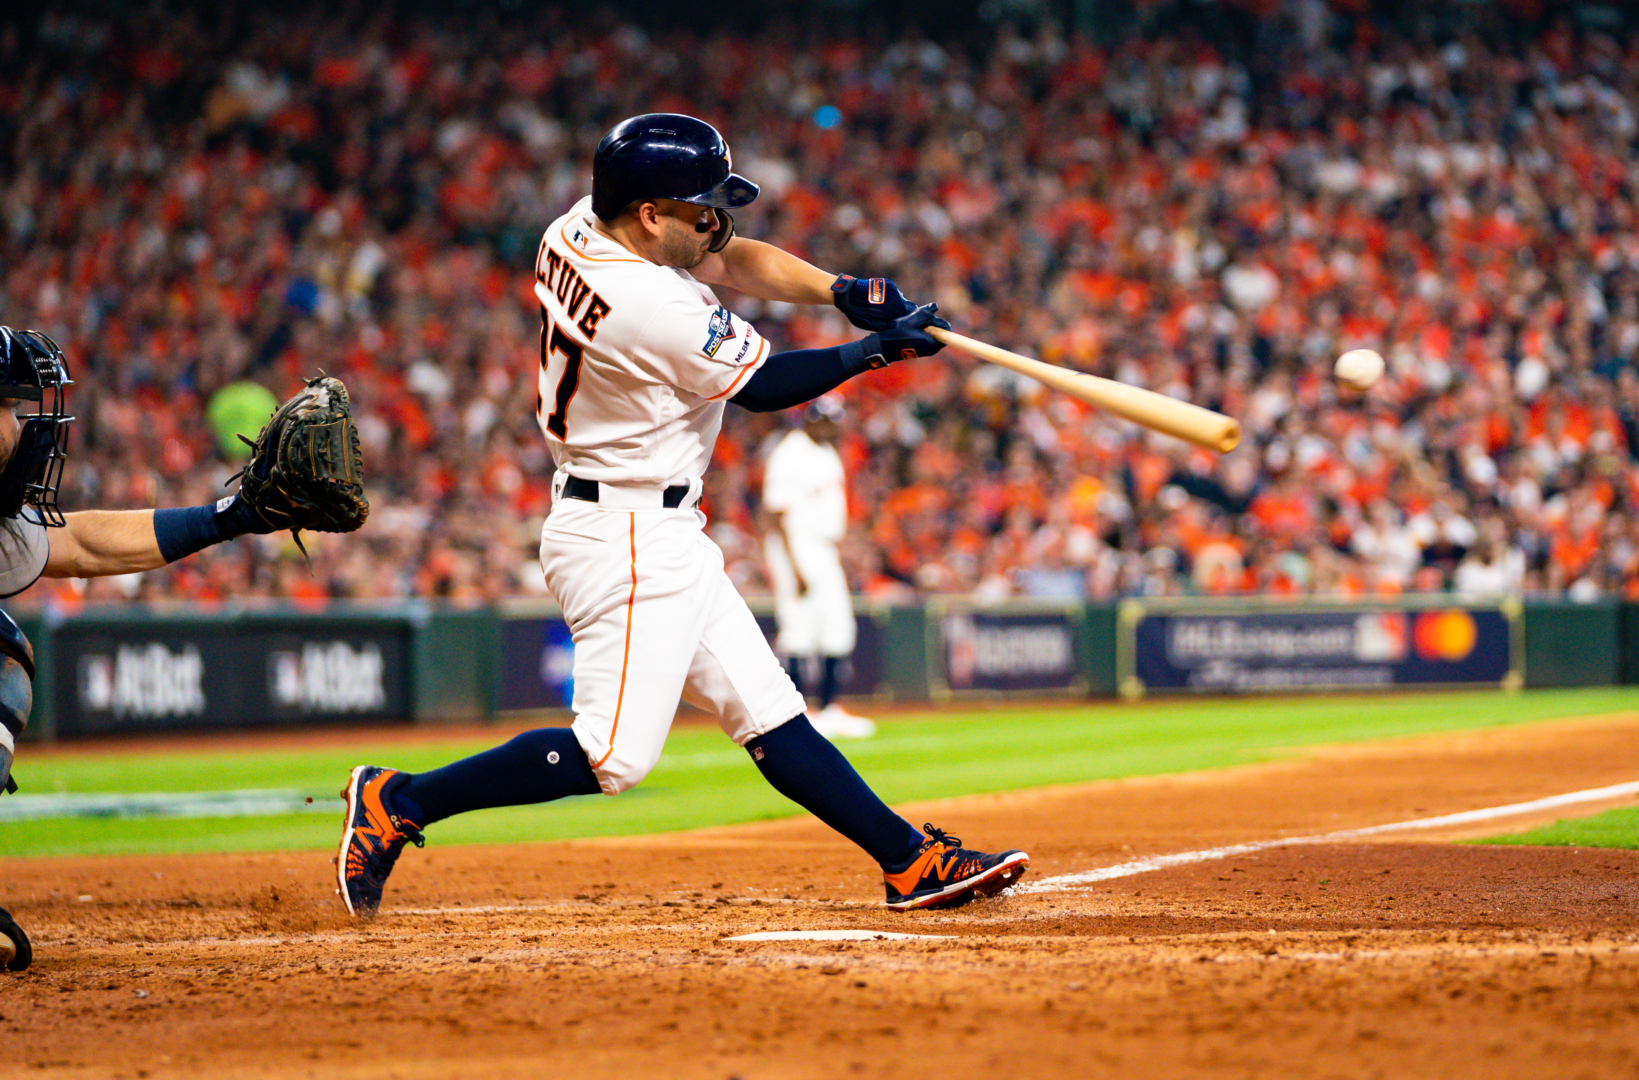 José Altuve, shown in Houston's American League Division Series Game 1 win over Tampa Bay, sent the Astros to the World Series with a 2-run walkoff home run in Game 6 of the AL Championship Series against the Yankees. | Courtesy of Houston Astros